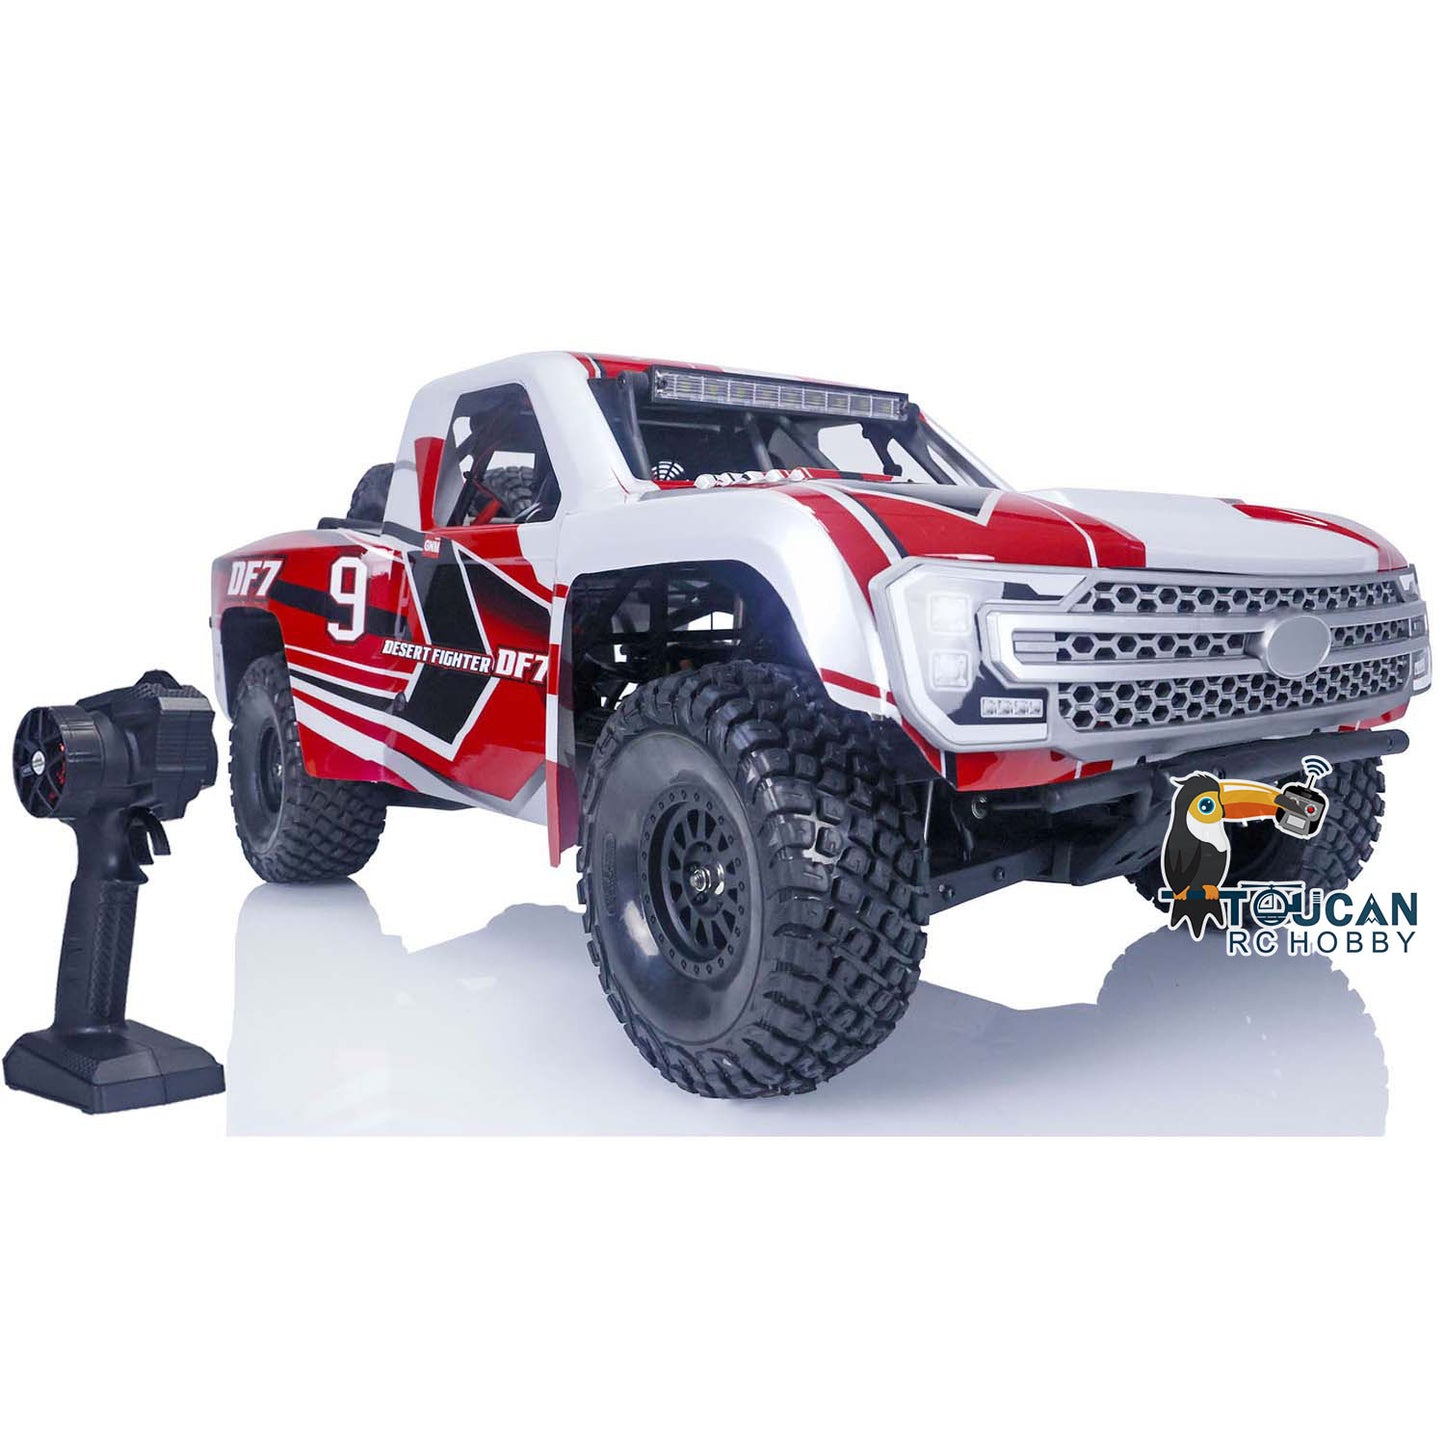 In Stock YIKONG DF7 V2 1/7 RC Car 4WD Remote Control Desert Crawler Painted Assembled Off-road Vehicles Motor Servo ESC Hobby Model